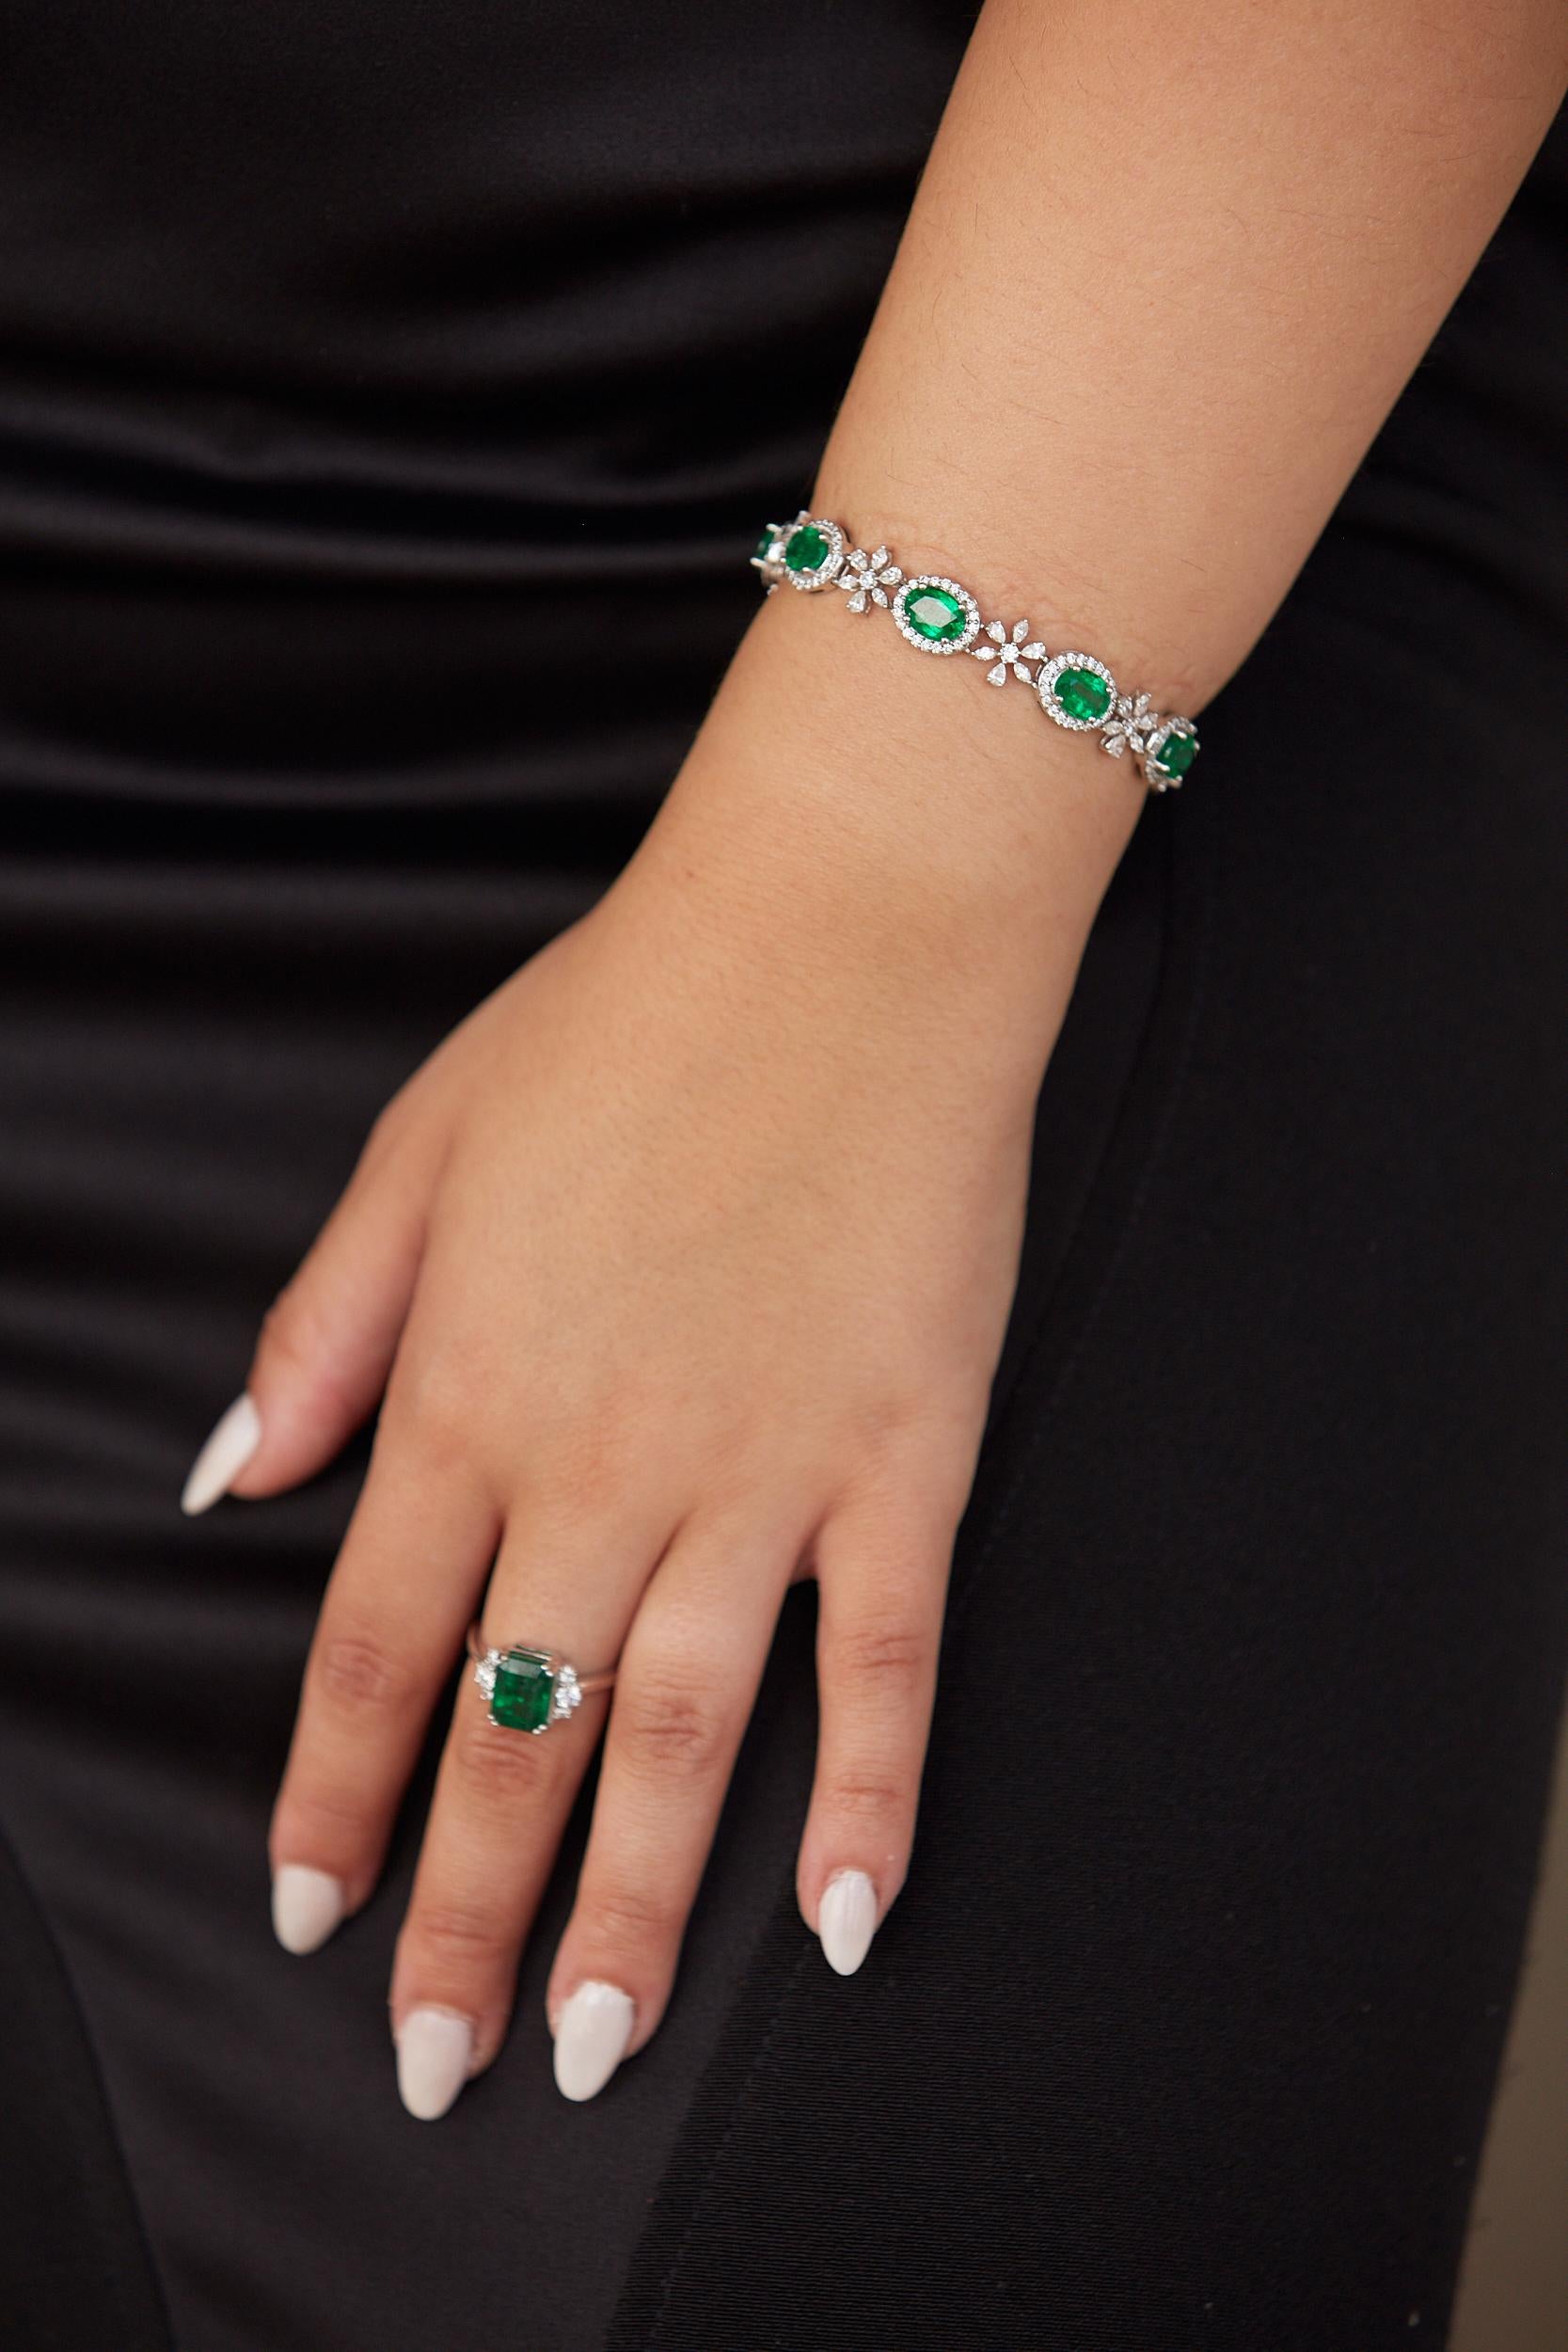 Tresor Diamond Bracelet features 4.20 cts diamond and 9.68 cts emerald in 18k white gold. The Bracelet are an ode to the luxurious yet classic beauty with sparkly diamonds. Their contemporary and modern design makes them versatile in their use. The